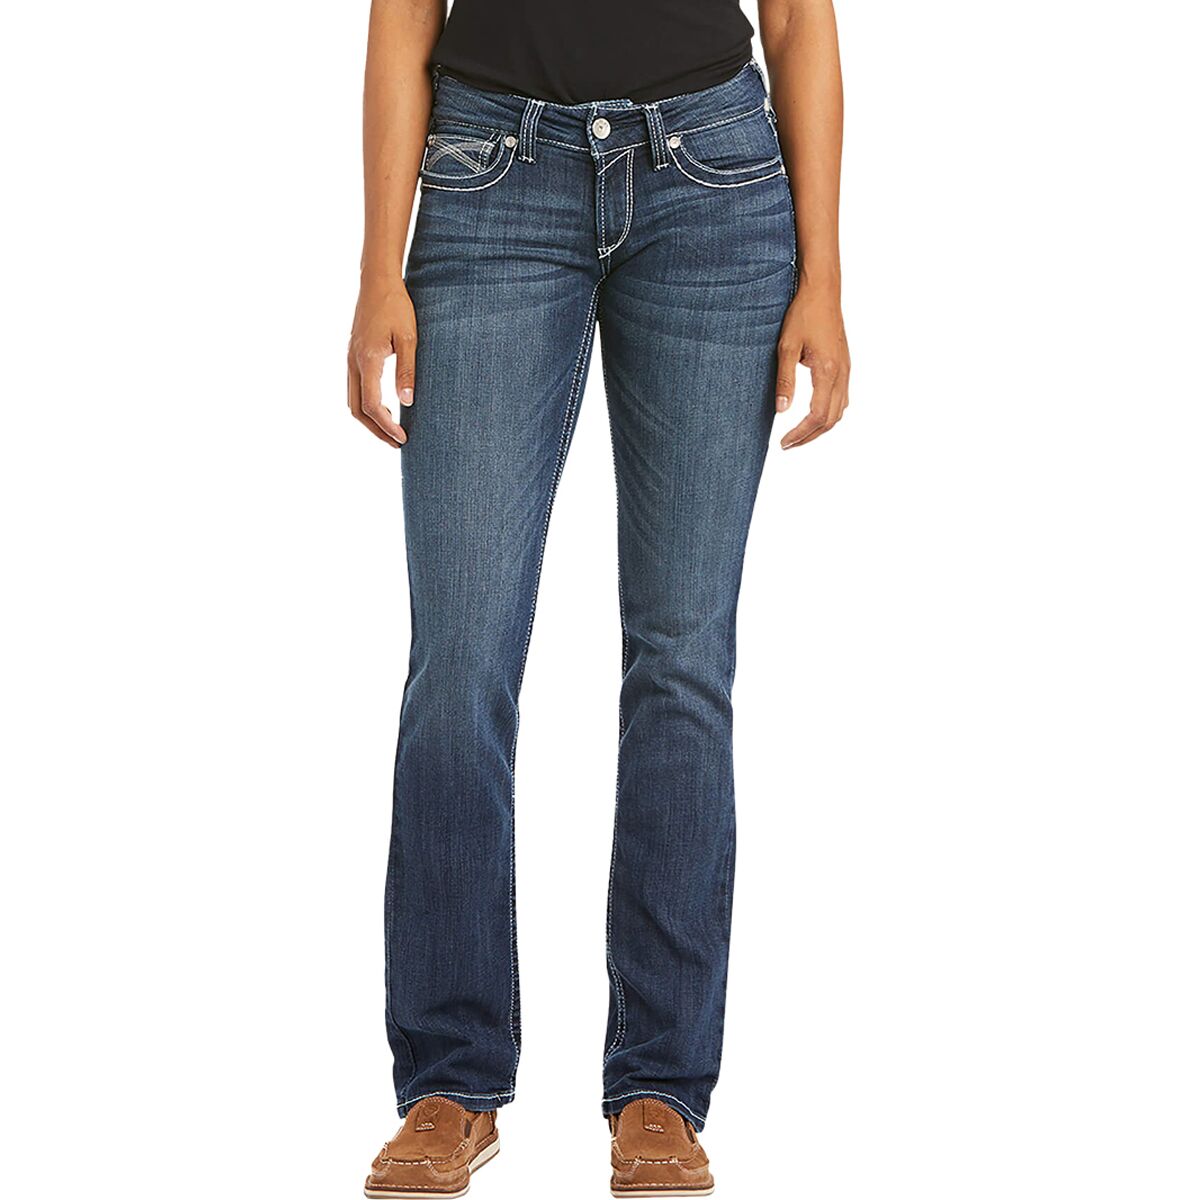 Ariat REAL MidRise Stretch Ivy Stackable StraightLeg Jean-Women's